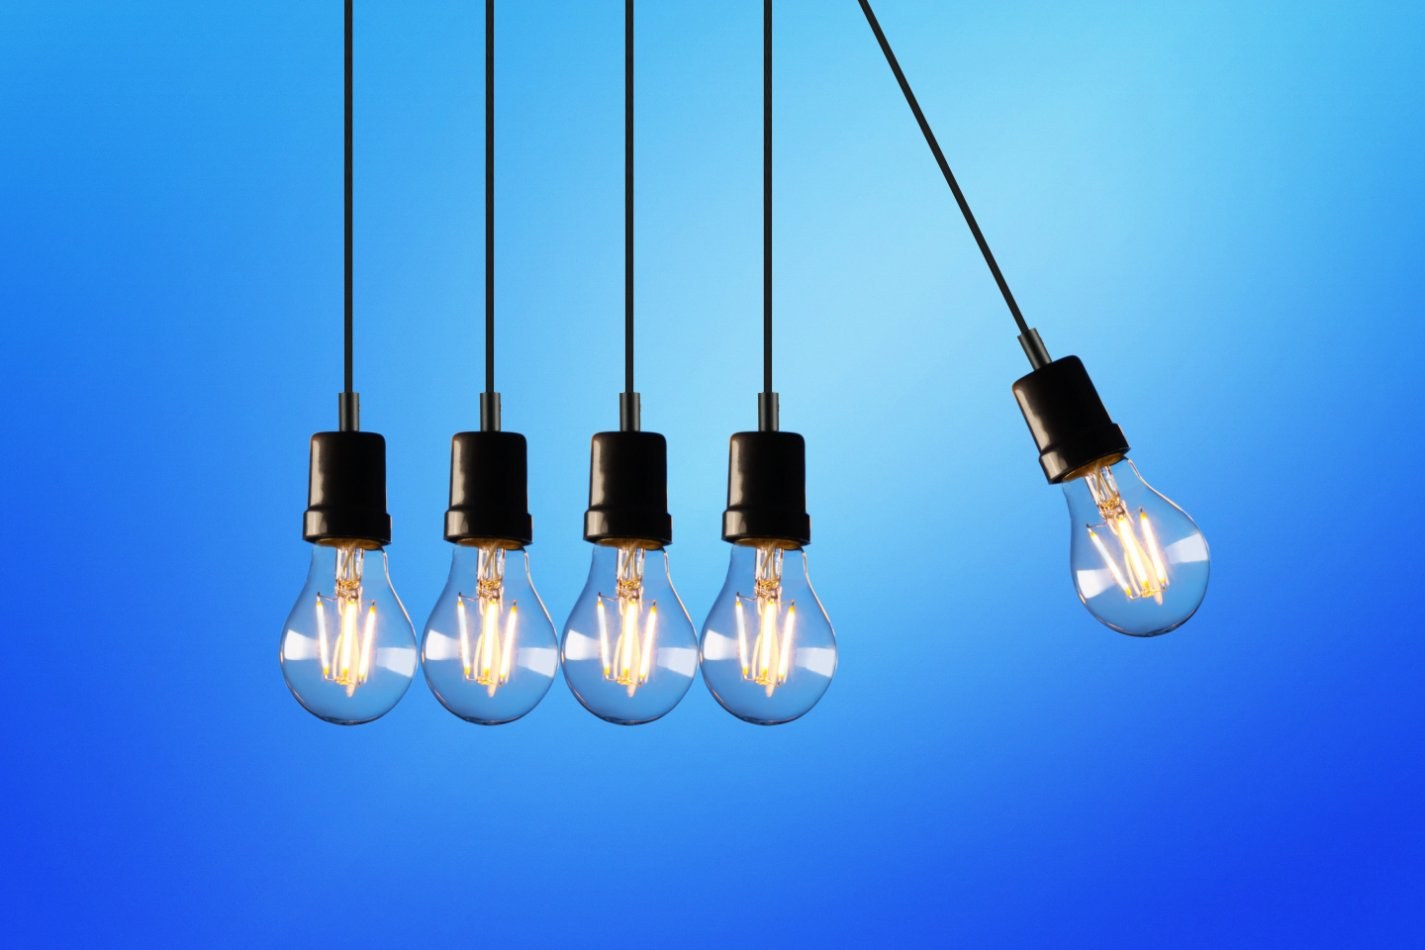 Lightbulbs with a blue background